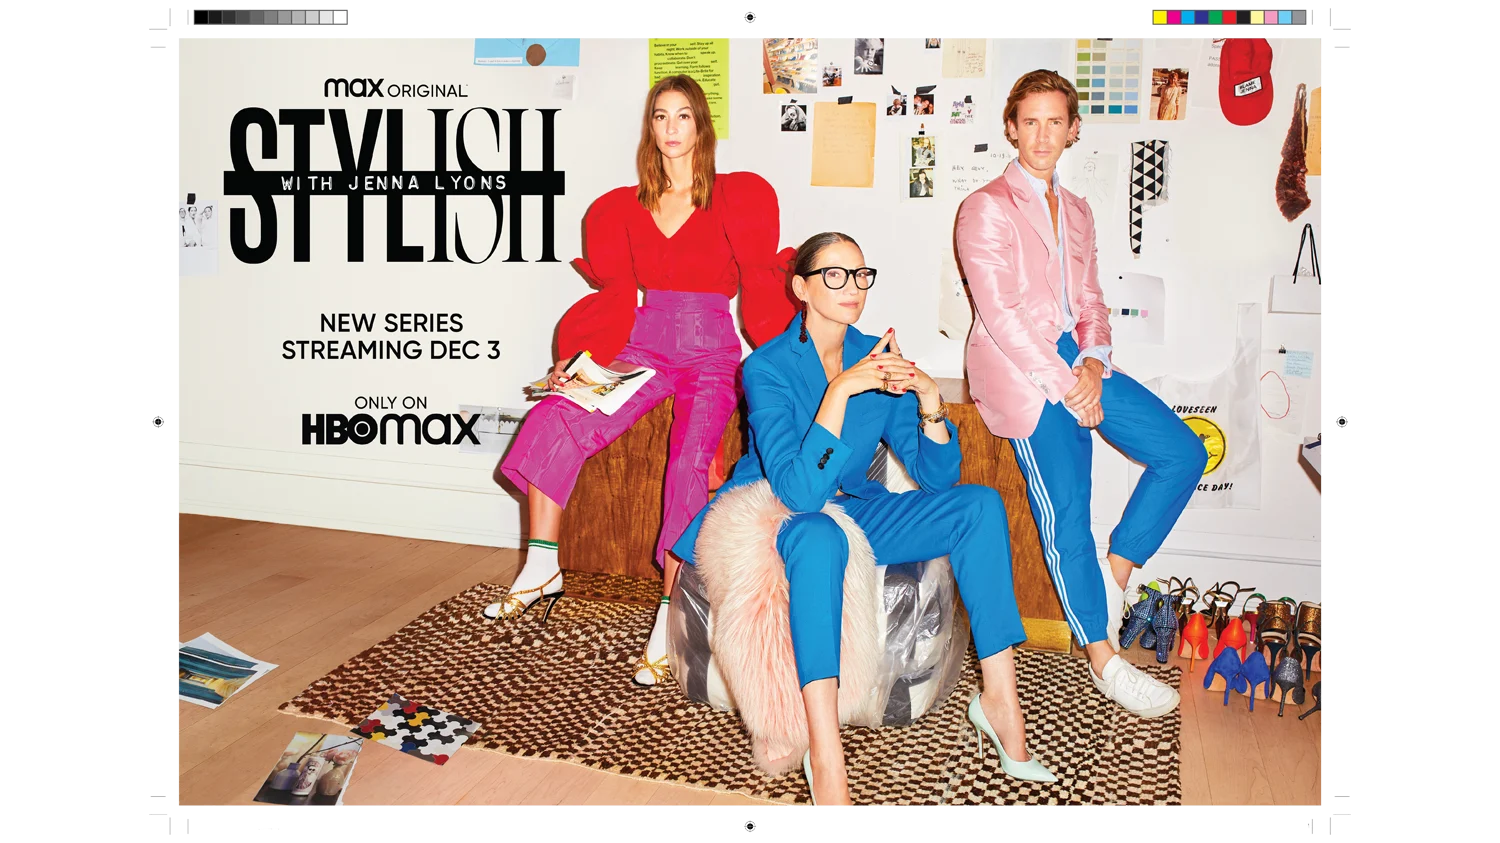 Jenna Lyons is an internationally recognized style icon with a brand new reality show on HBOMax. BGSTR was excited to have the opportunity to flex our print capabilities from magazines to billboards in creating a number of different deliverables to promote the show.